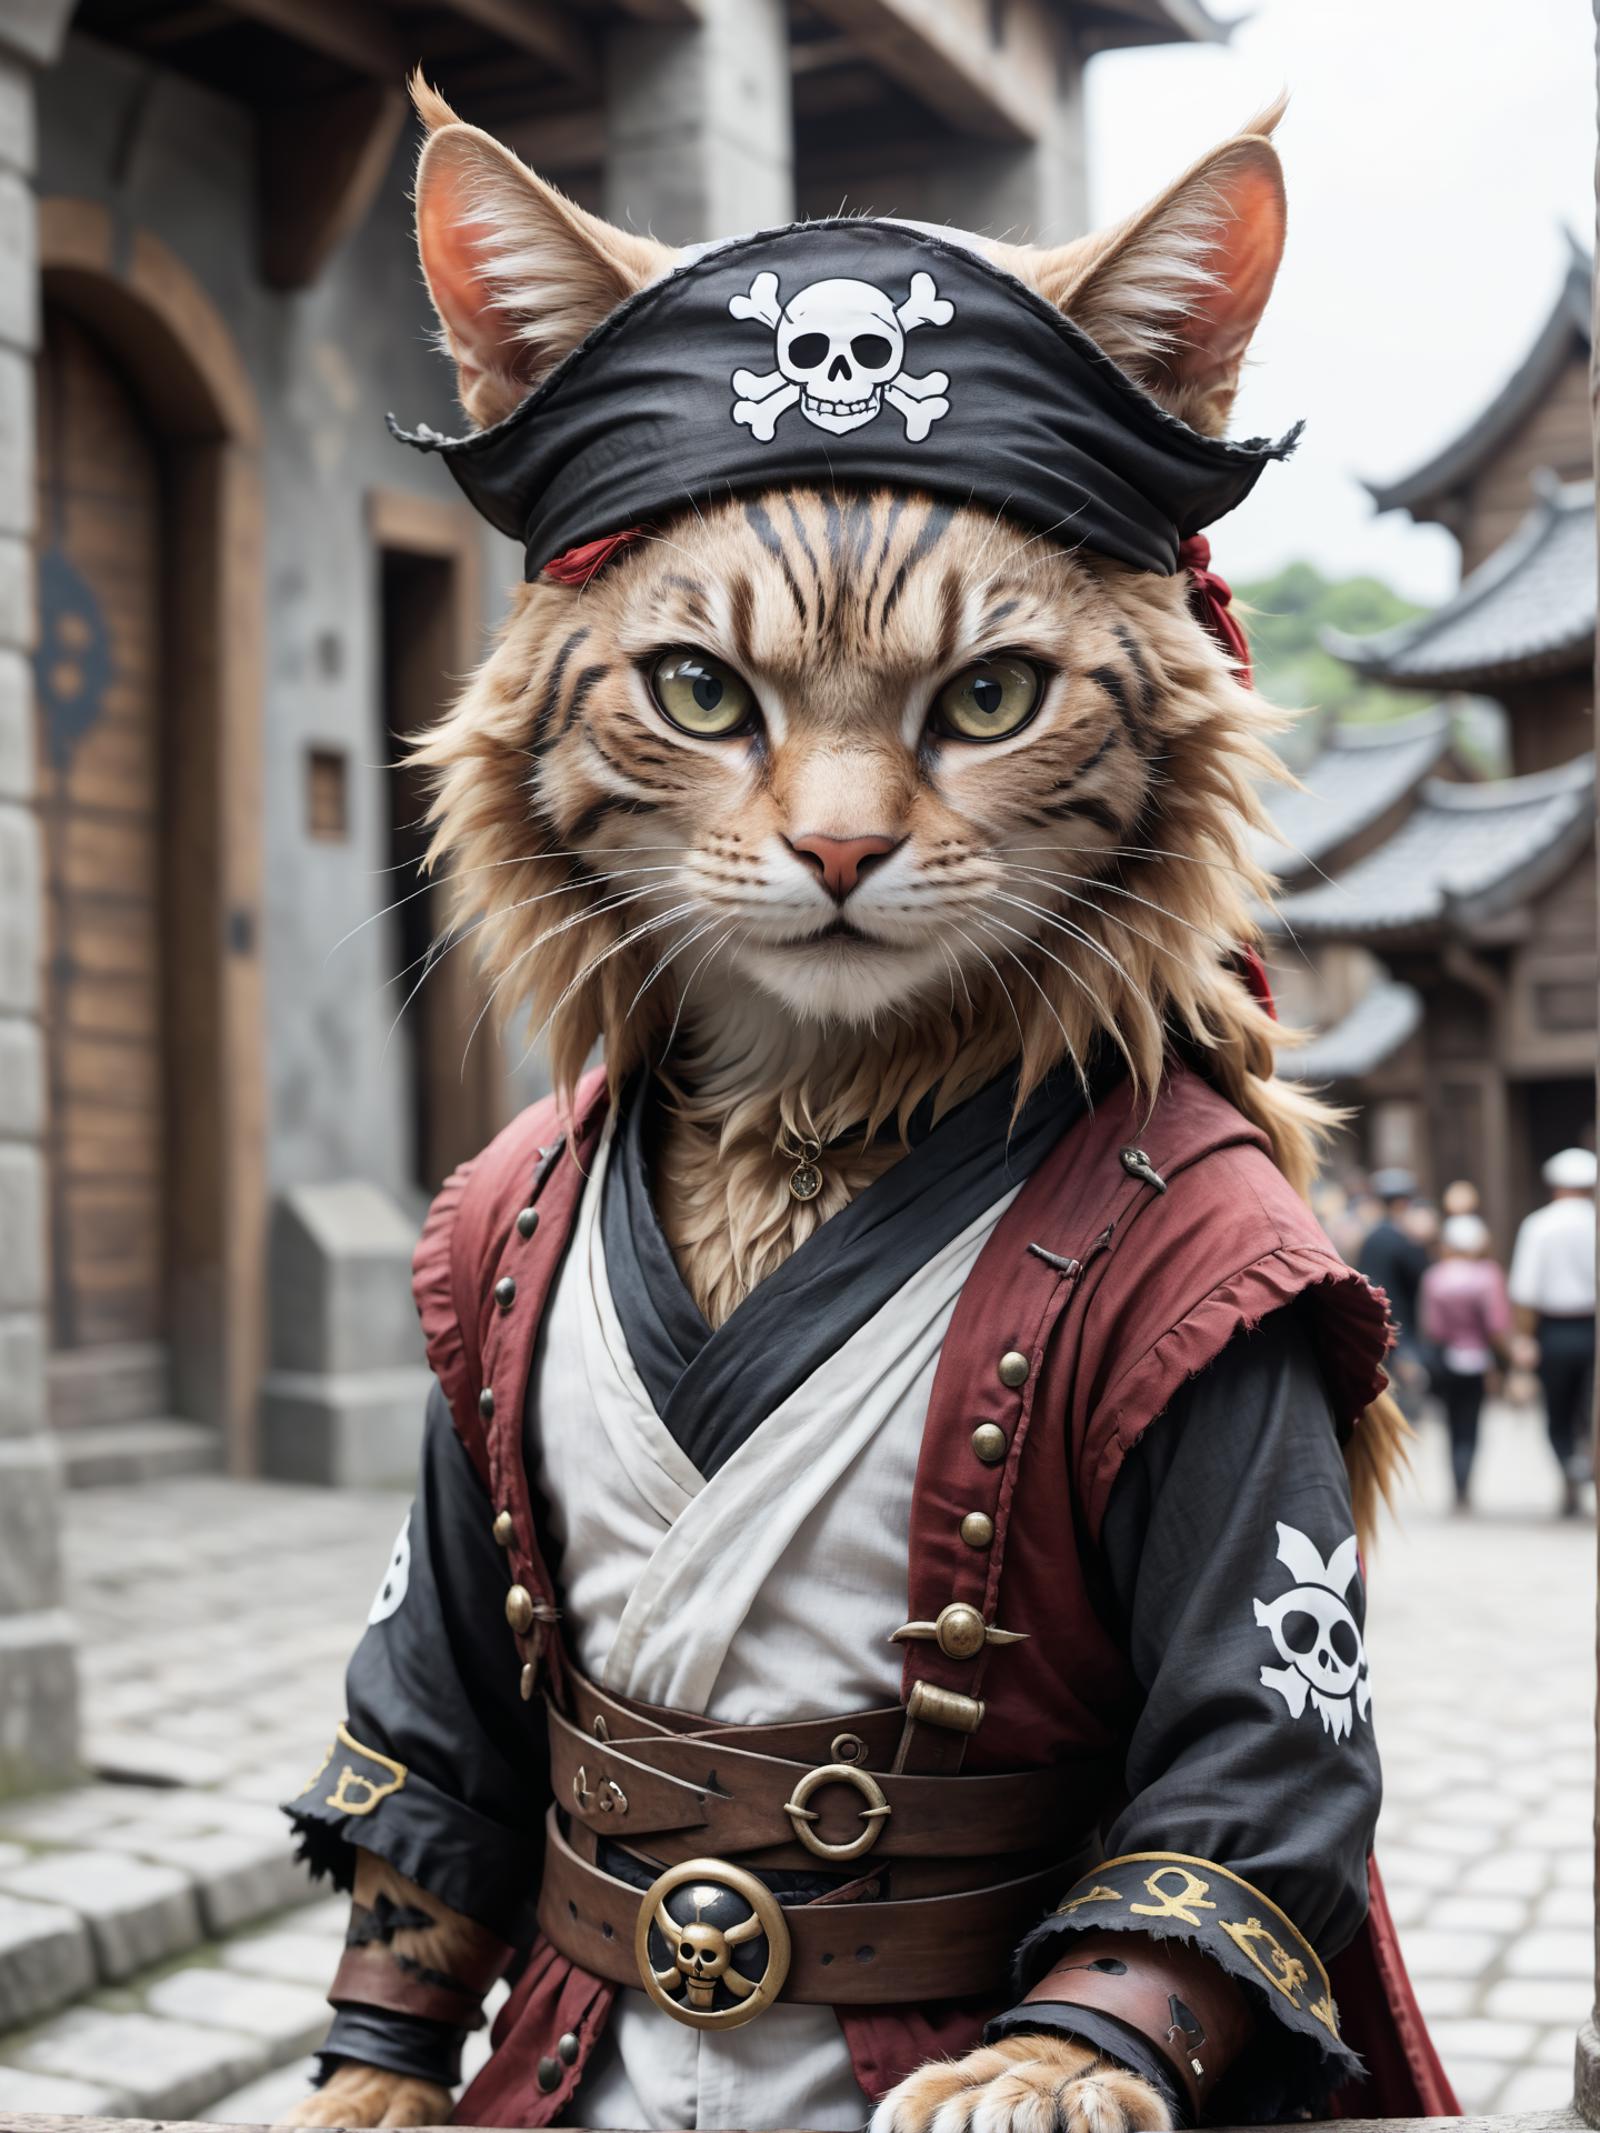 A cat dressed up as a pirate with a costume and a pirate hat.